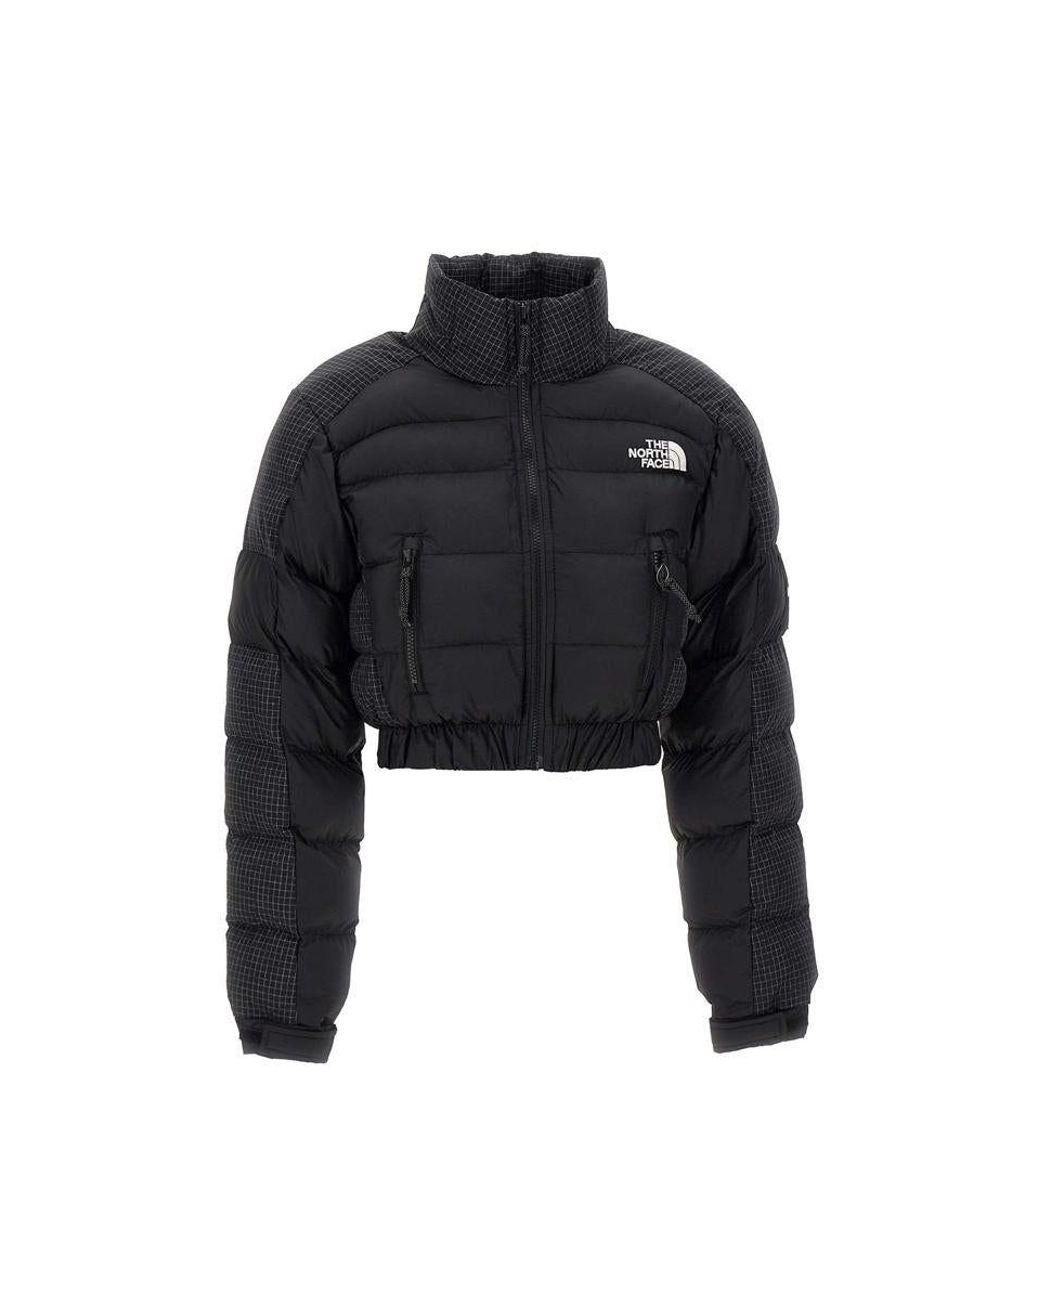 The North Face 